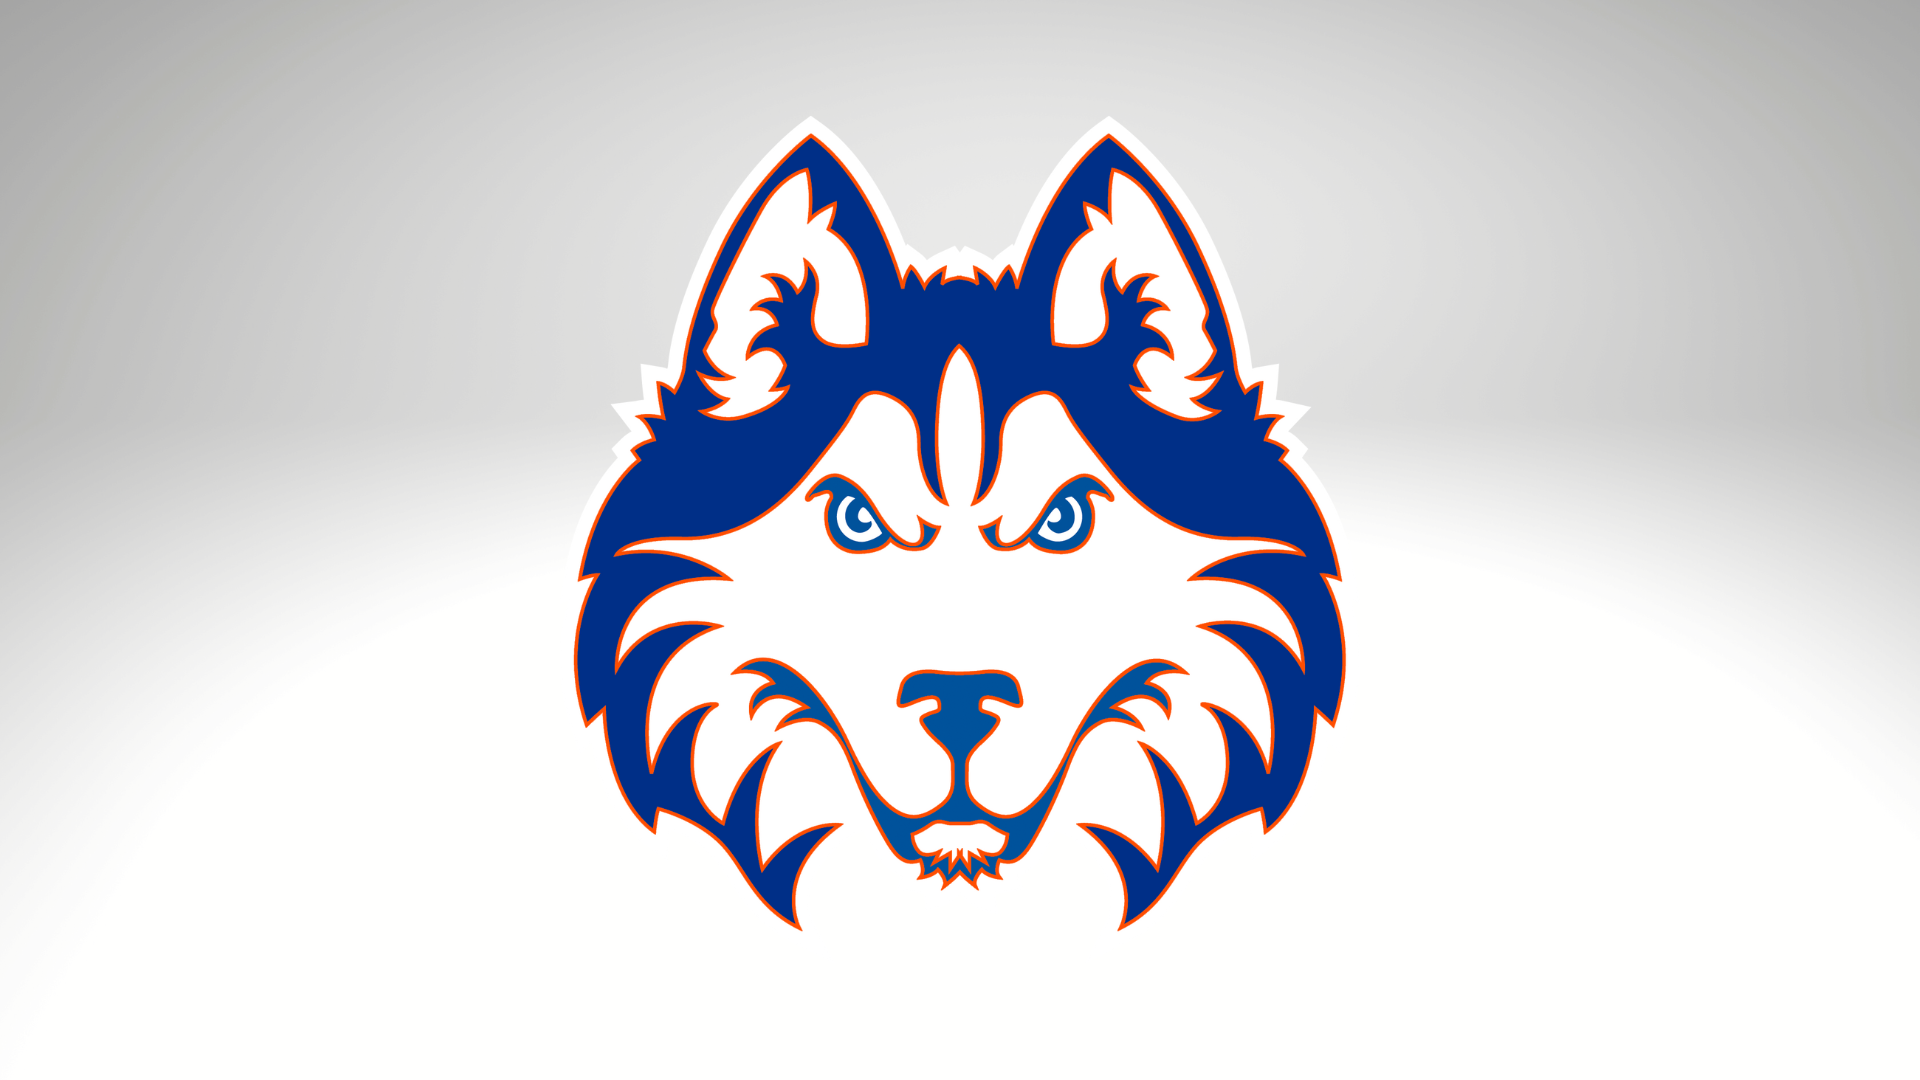 Is A Rebrand In Store For the Wolves? - Zone Coverage